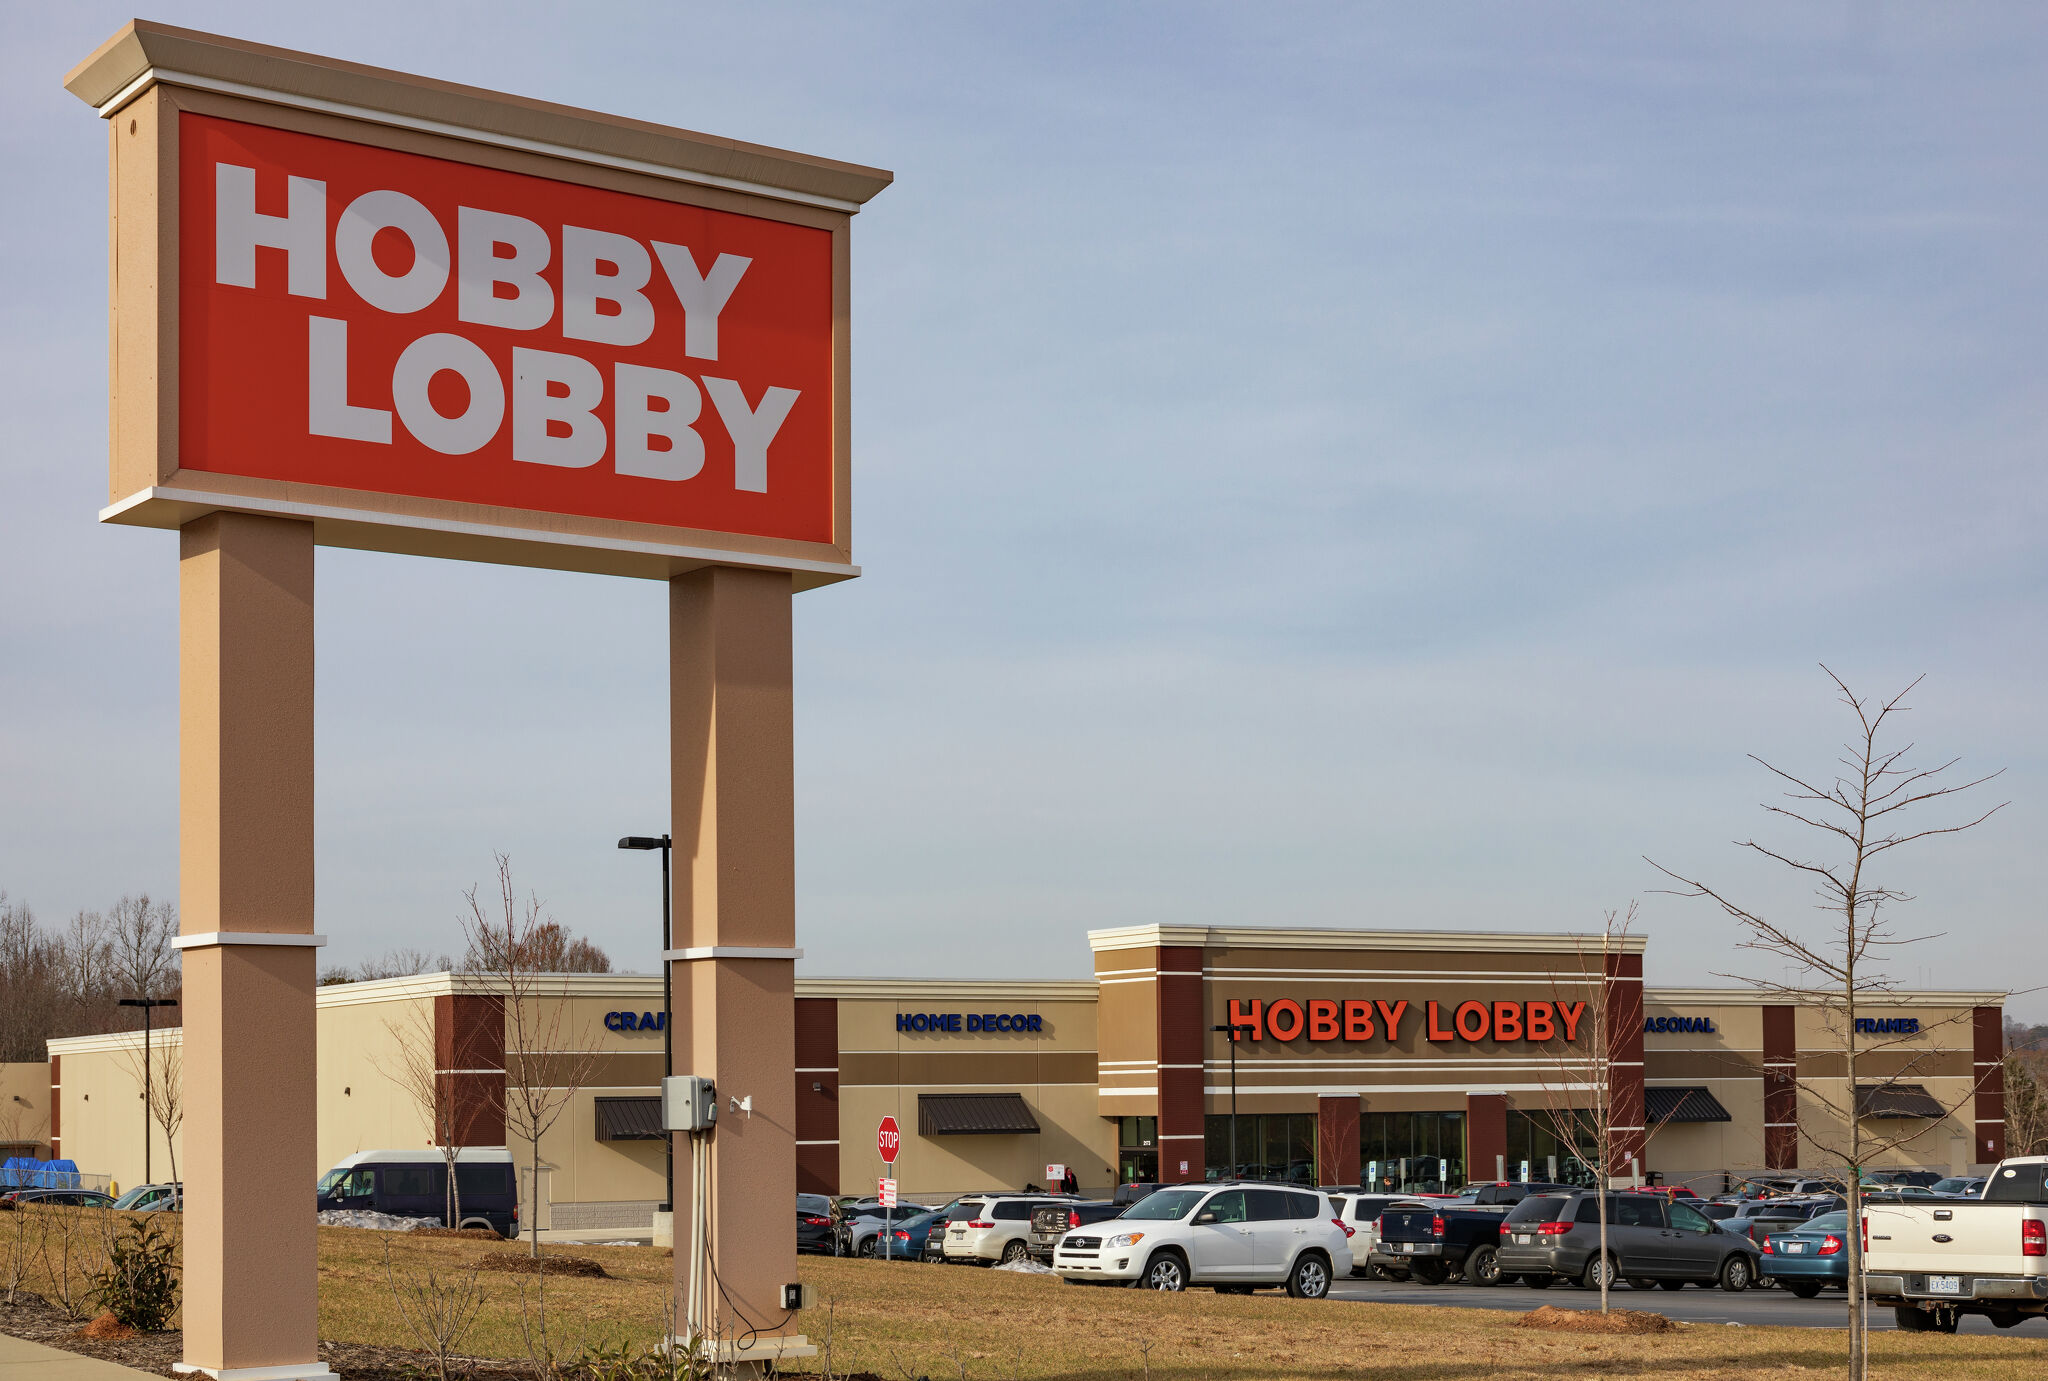 Hobby Lobby to build nearly $4M Central Texas store in Kyle